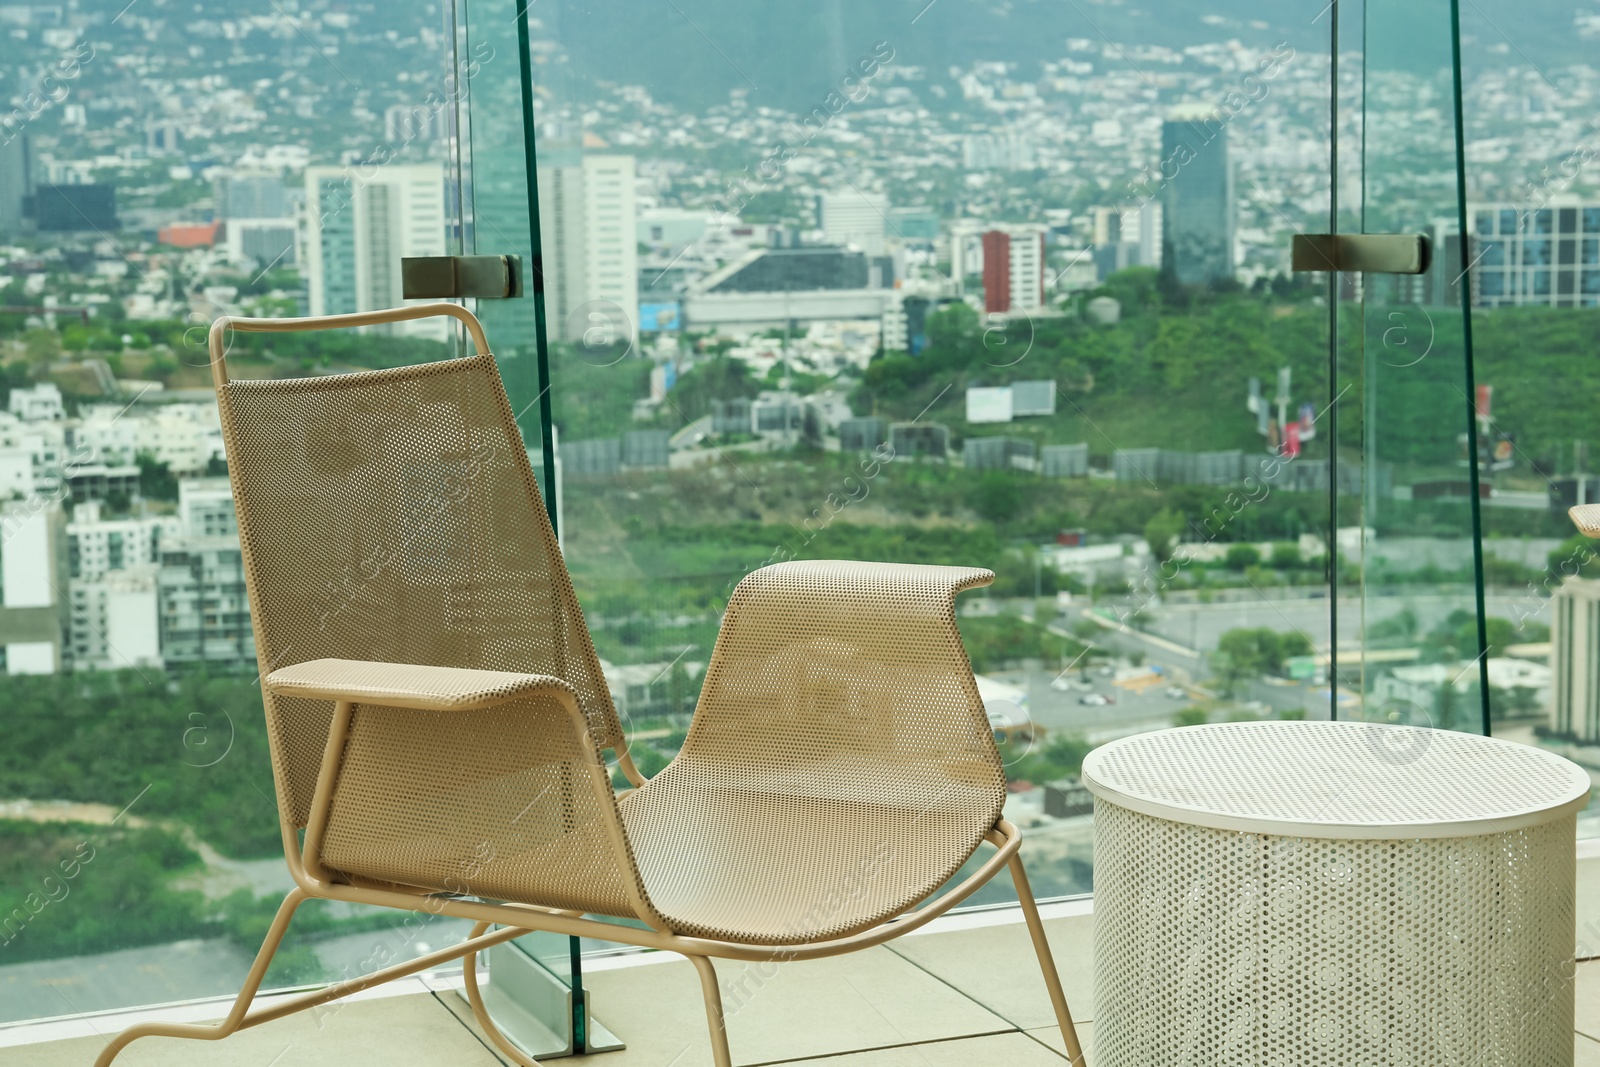 Photo of Coffee table and chair against picturesque landscape of city in cafe